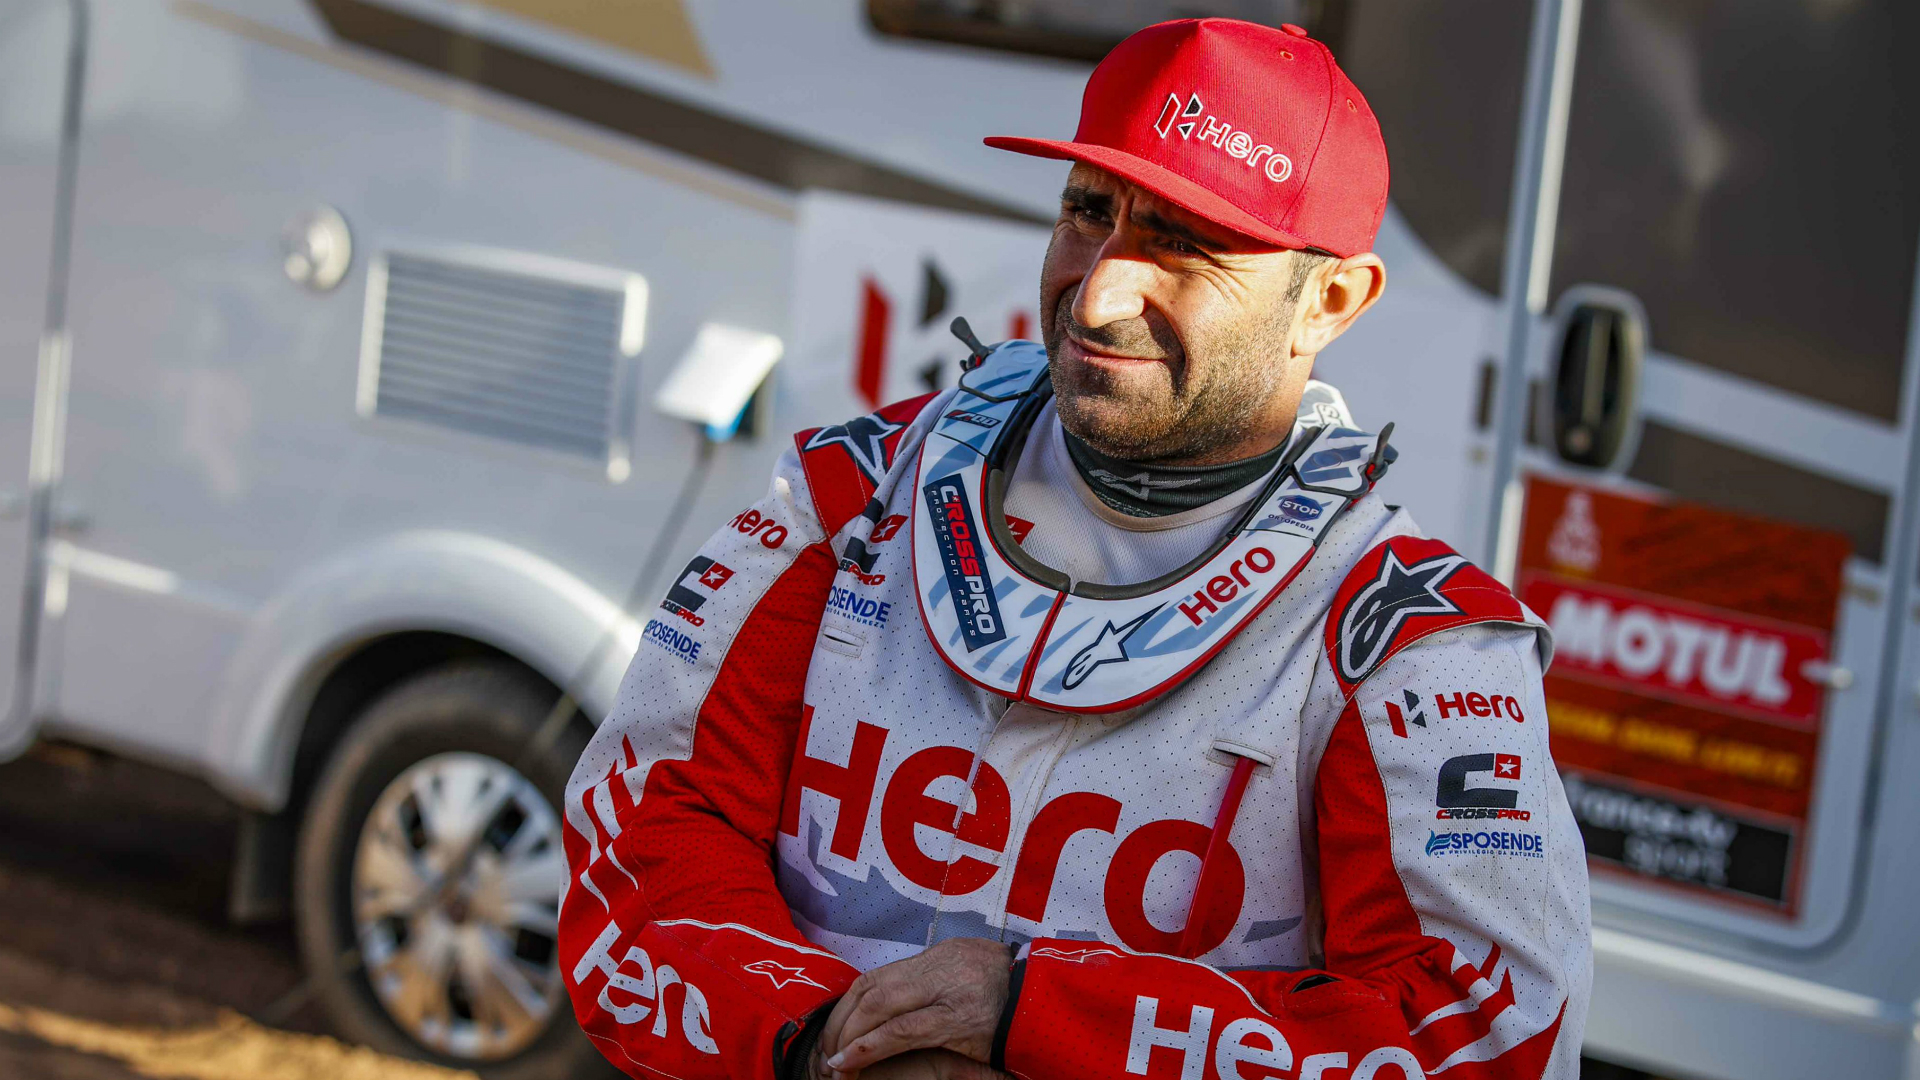 The Dakar Rally experienced tragedy during the seventh stage in Saudi Arabia, as Portuguese rider Paulo Goncalves suffered a fall and died.